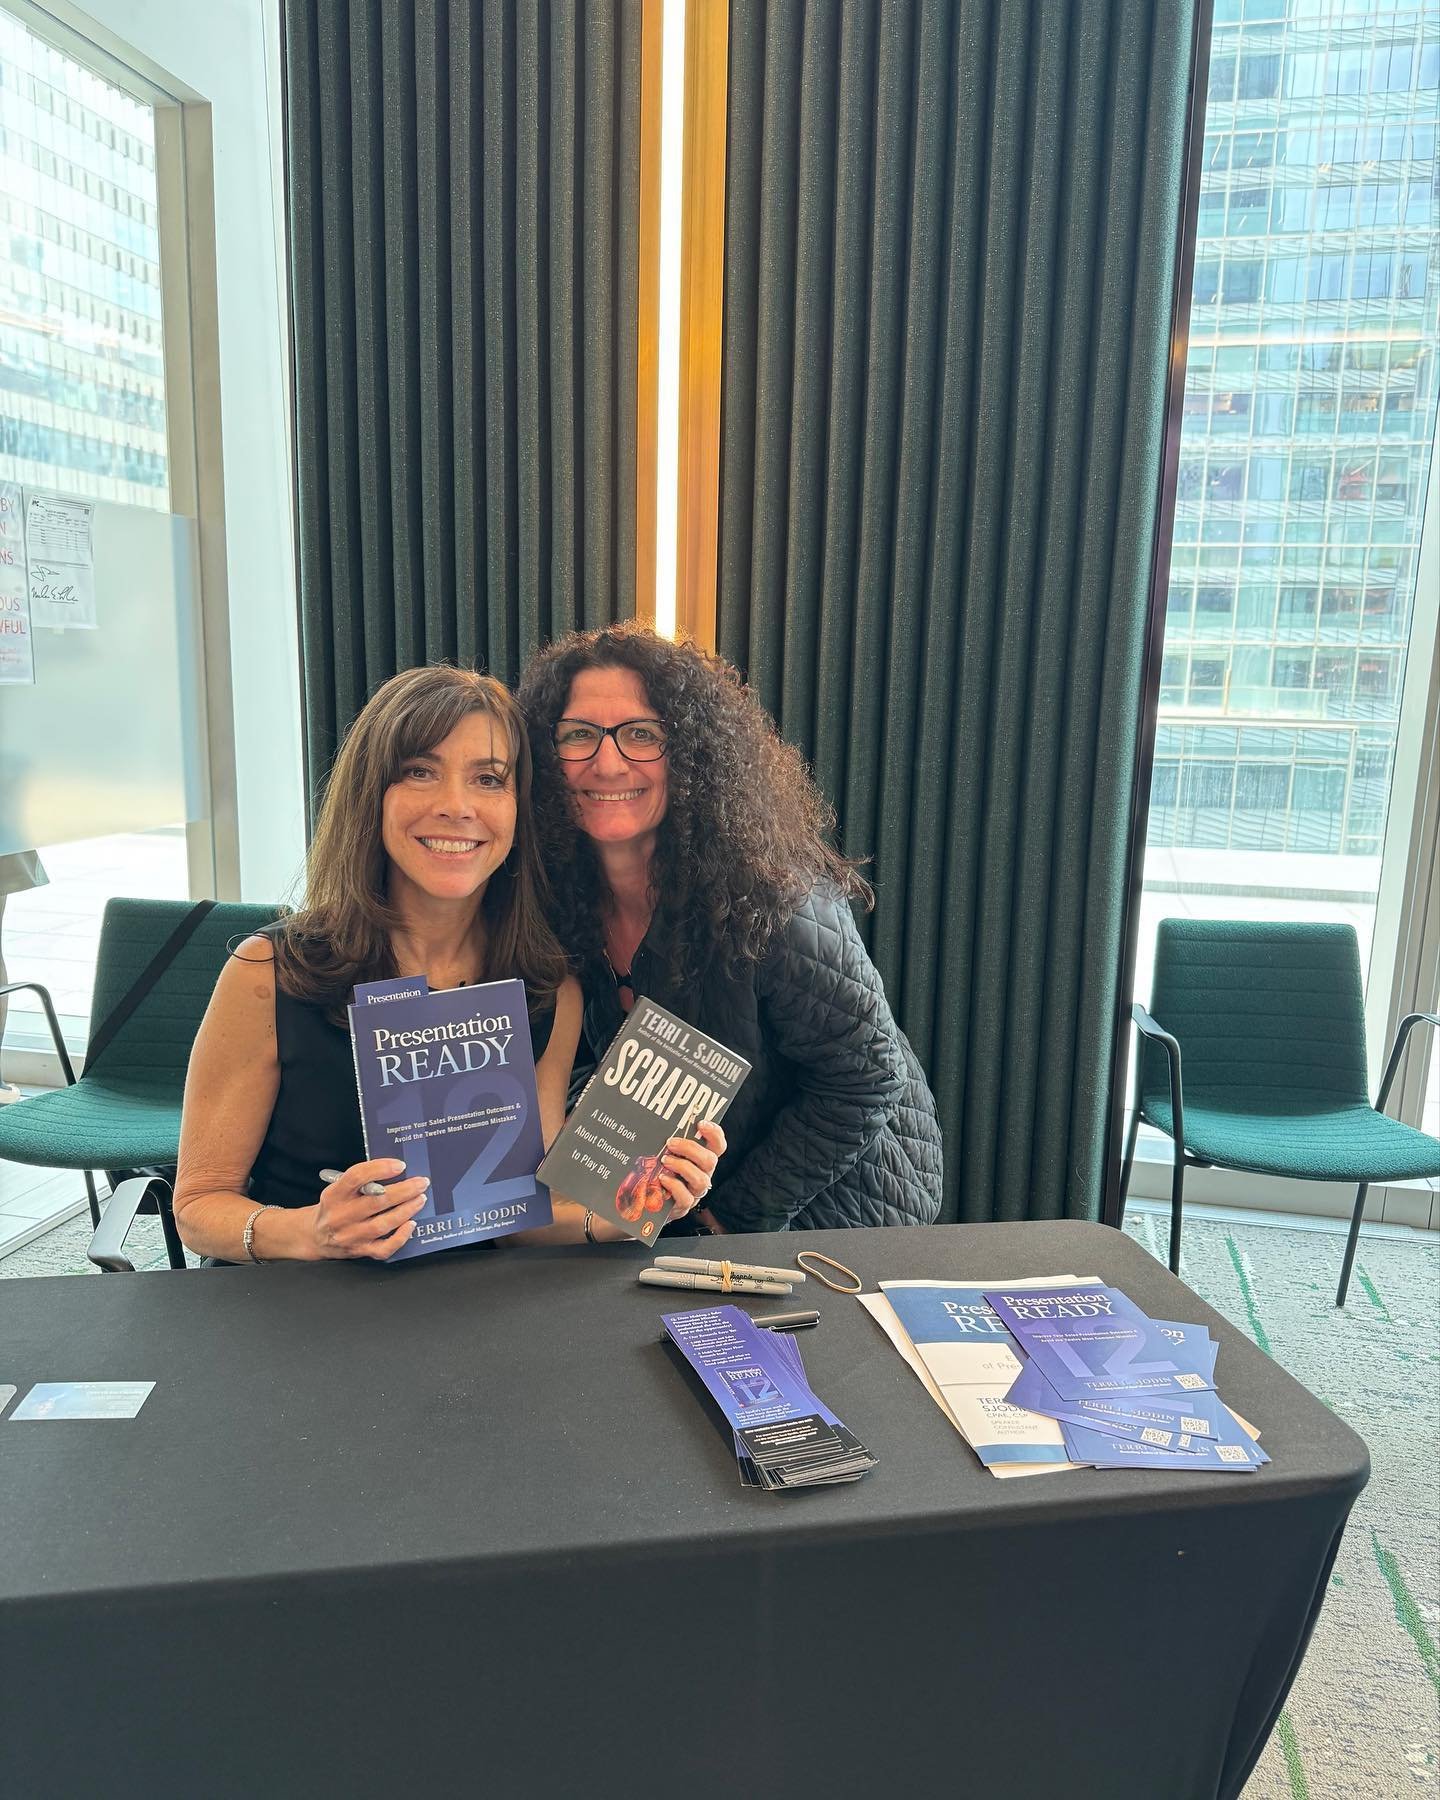 Last week, Sinead, Tom and I attended a presentation from Terri Sjodin on the art of presenting persuasively and we gained some invaluable insights! ✨

Terri Sjodin is a renowned speaker, author, and entrepreneur, celebrated for her expertise in help